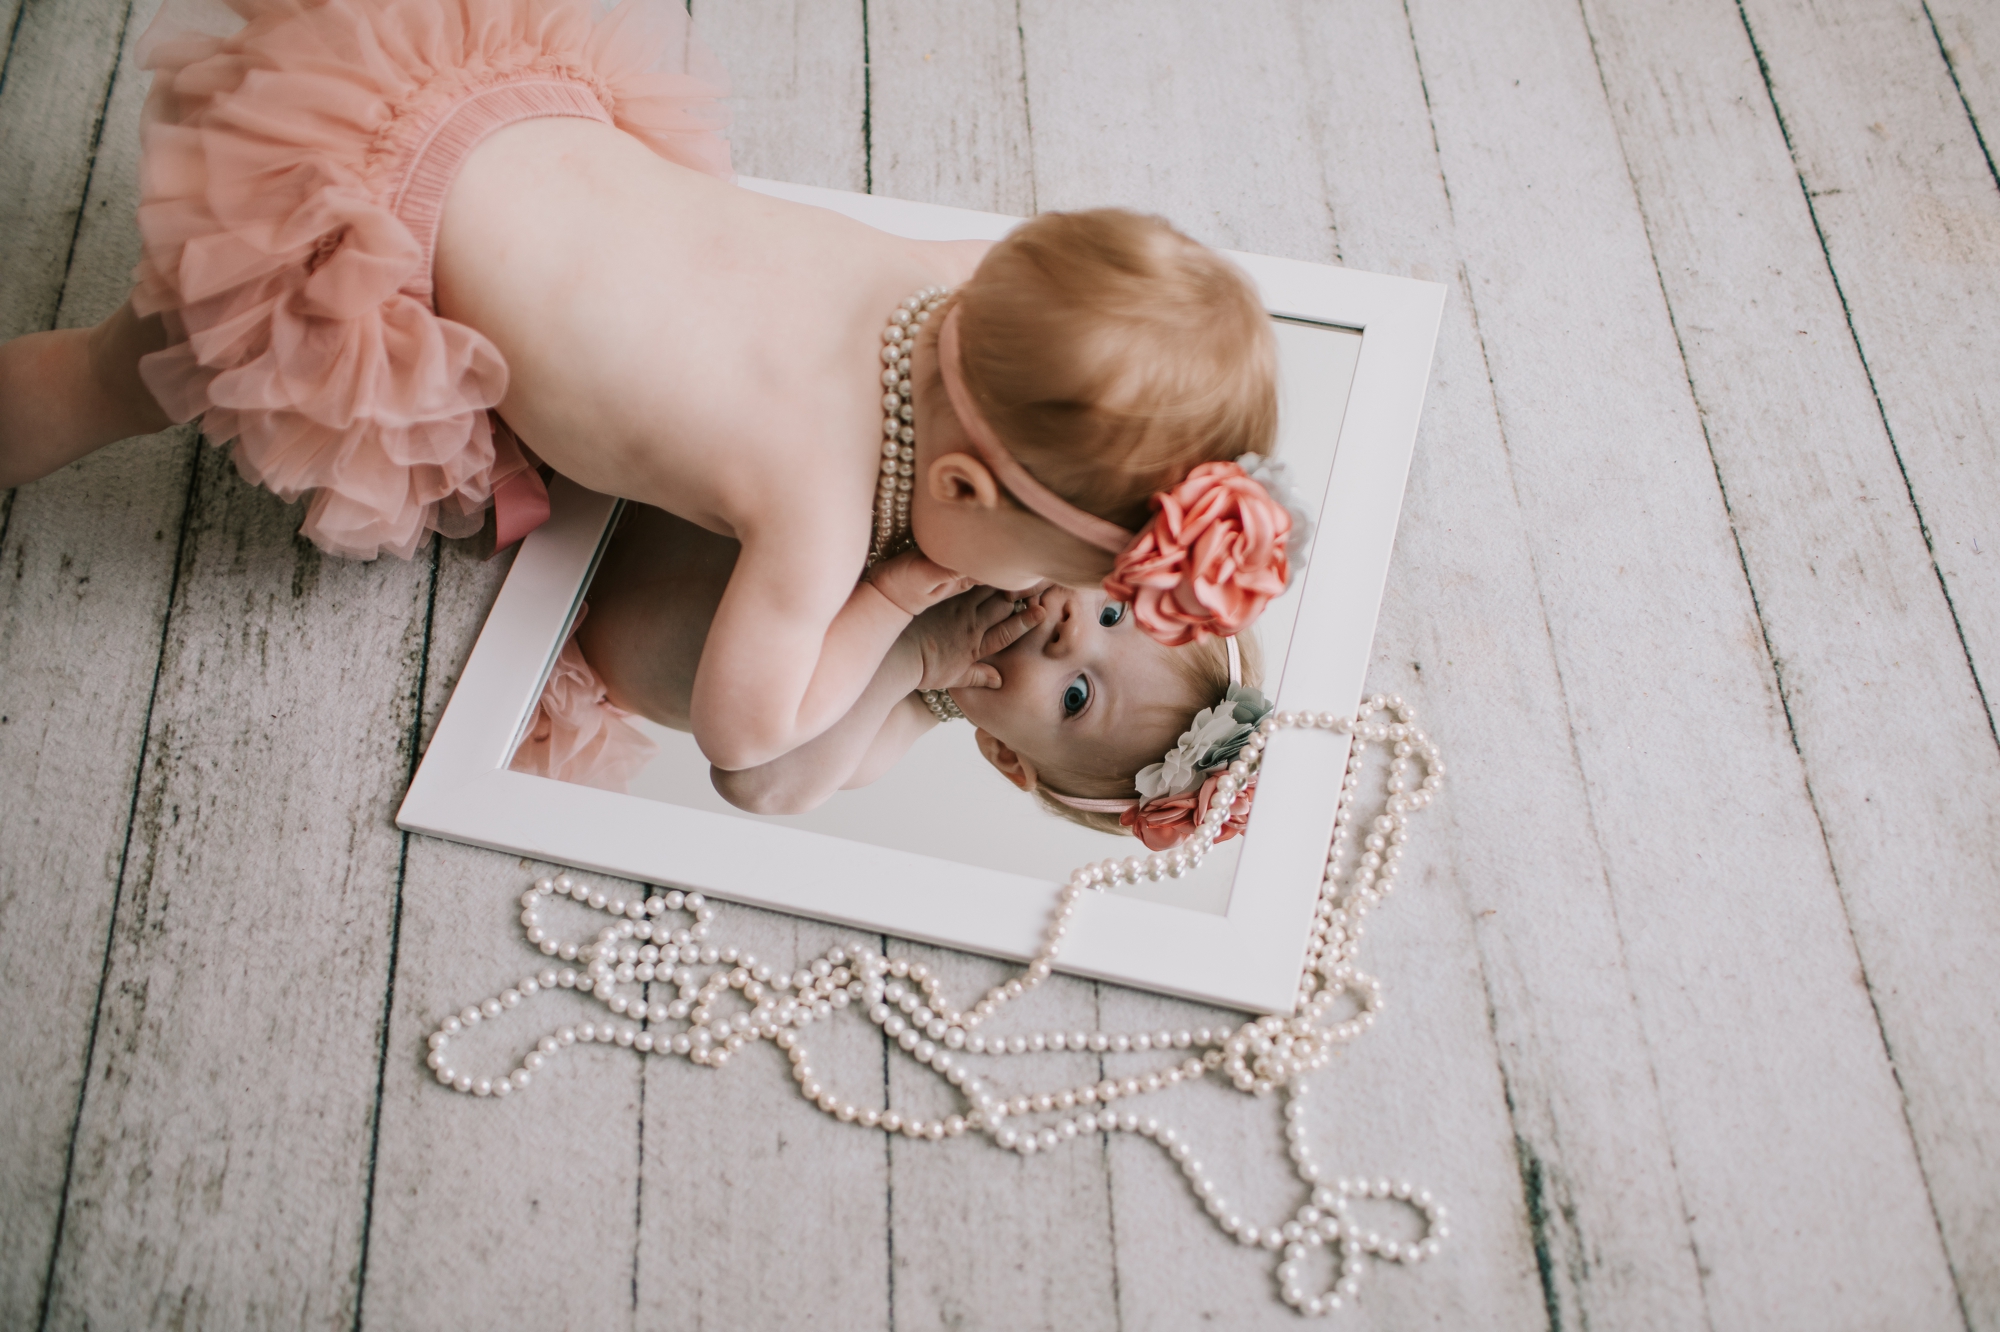 Silly image of baby looking at herself in the mirror.  Baby Photographer 63090